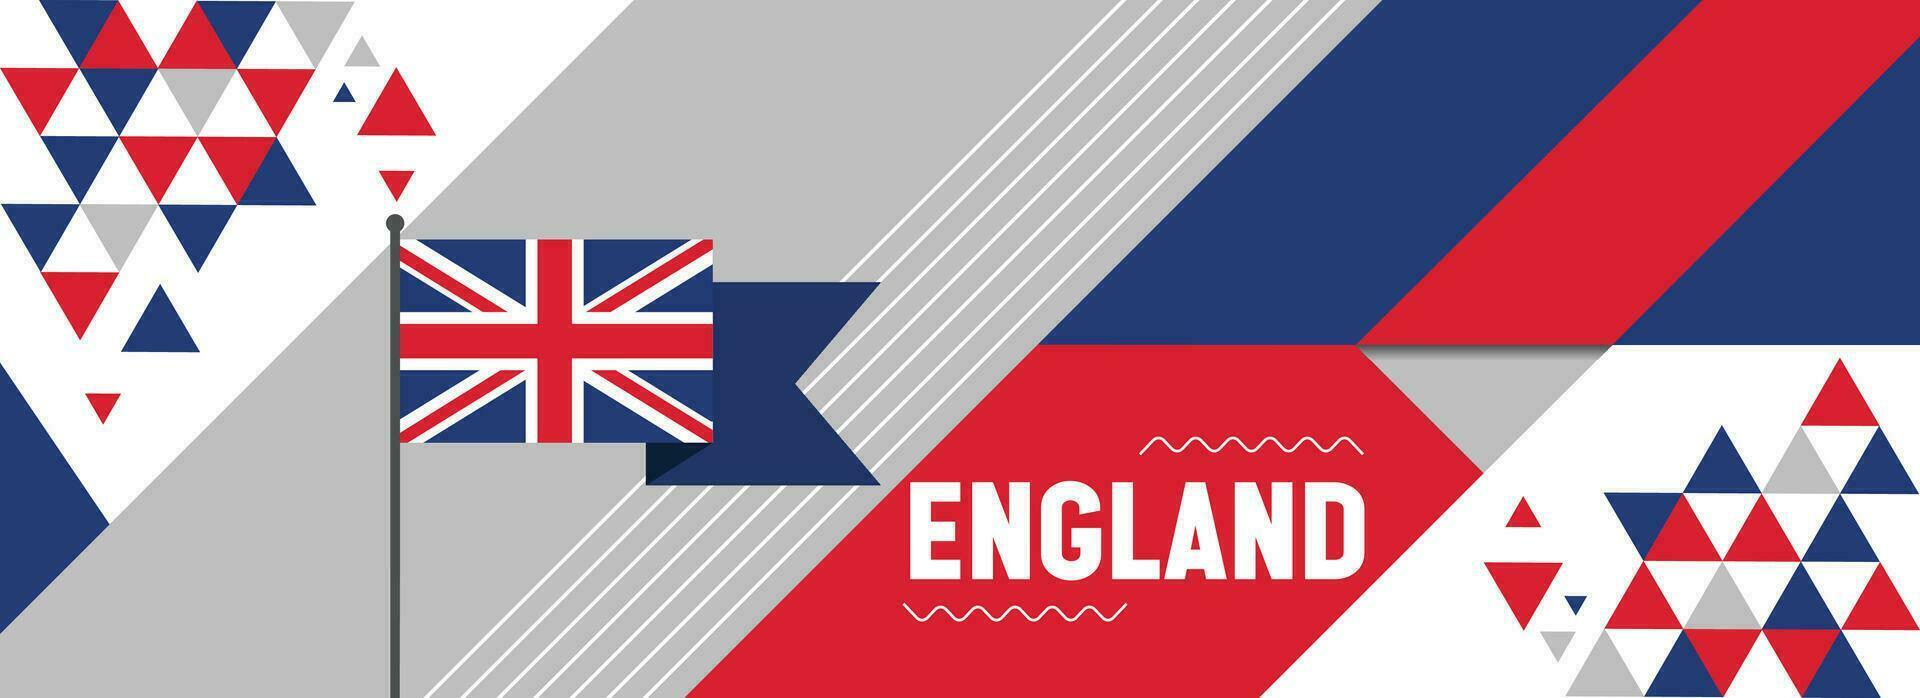 England national or independence day banner design for country celebration. Flag of Britain with modern retro design and abstract geometric icons. Vector illustration